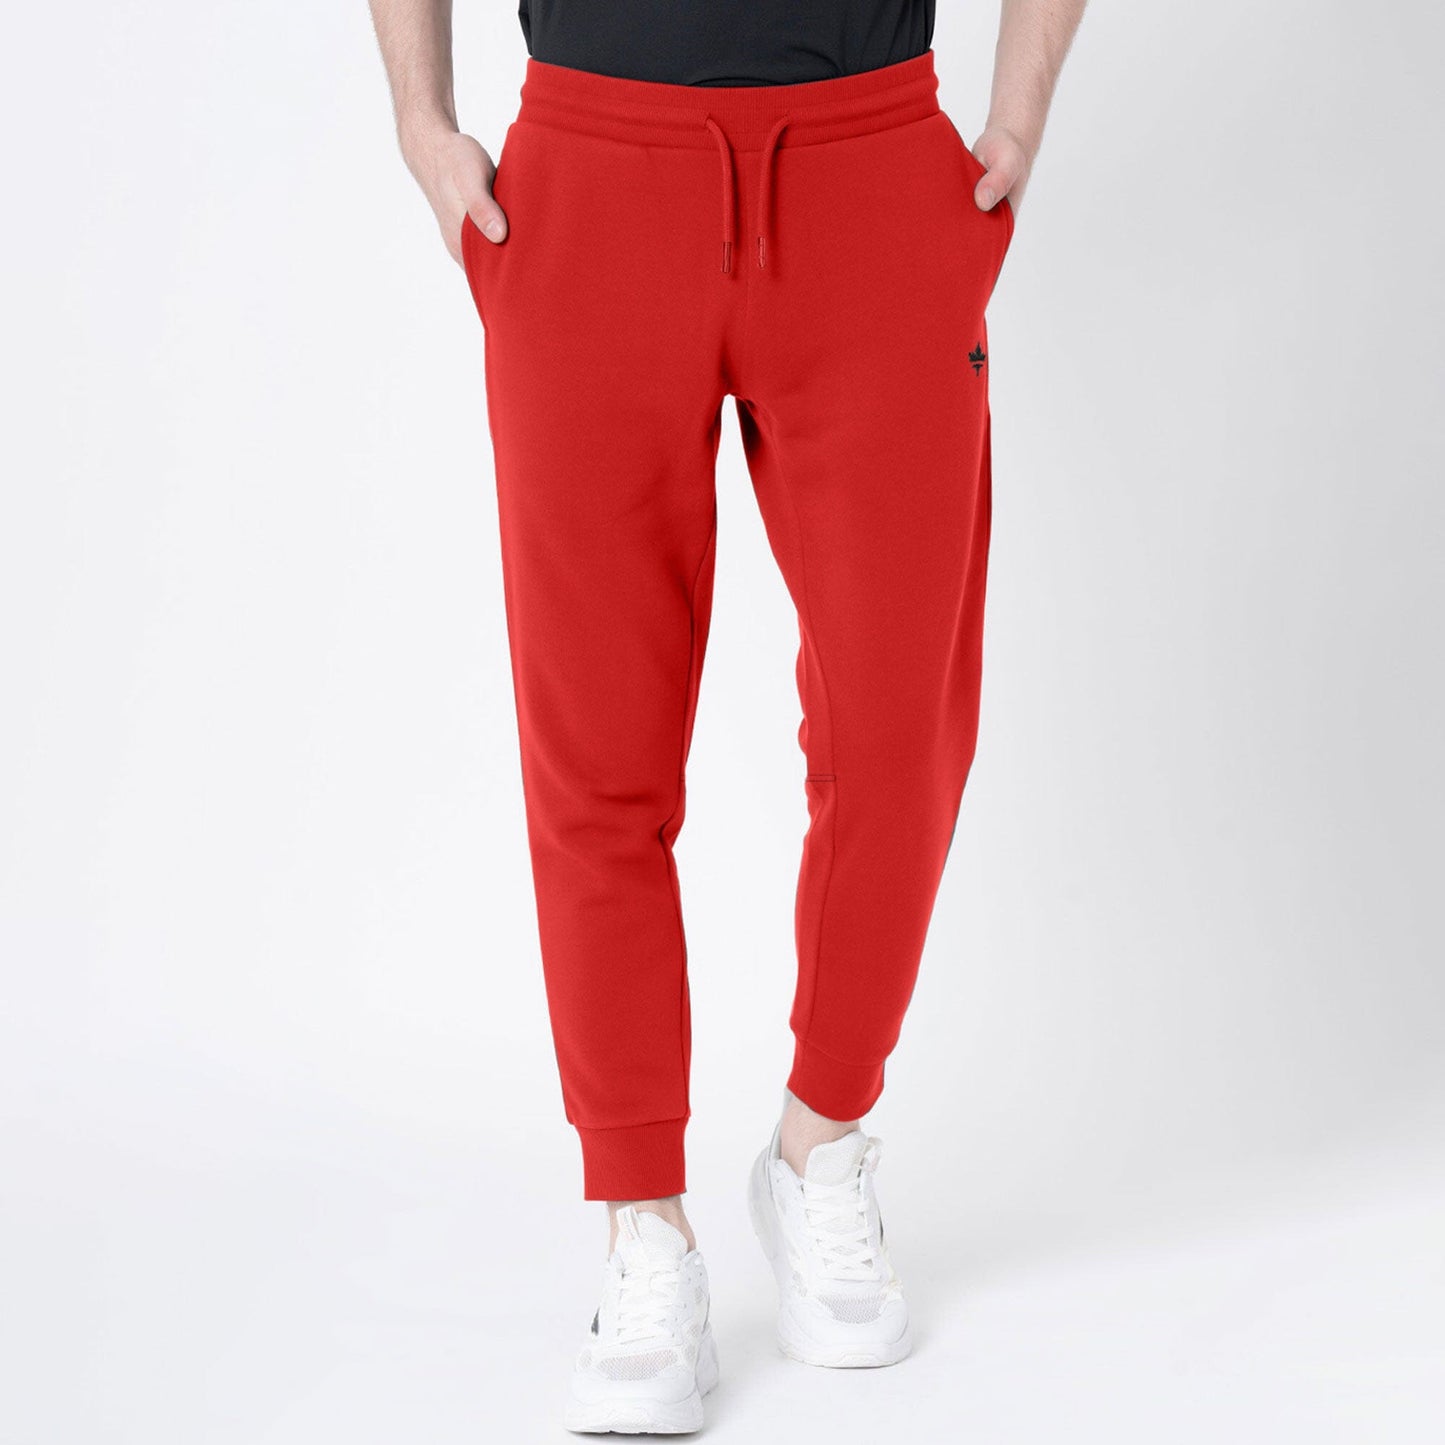 Polo Republica Men's Maple Leaf Embroidered Fleece Jogger Pants Men's Jogger Pants Polo Republica Red S 